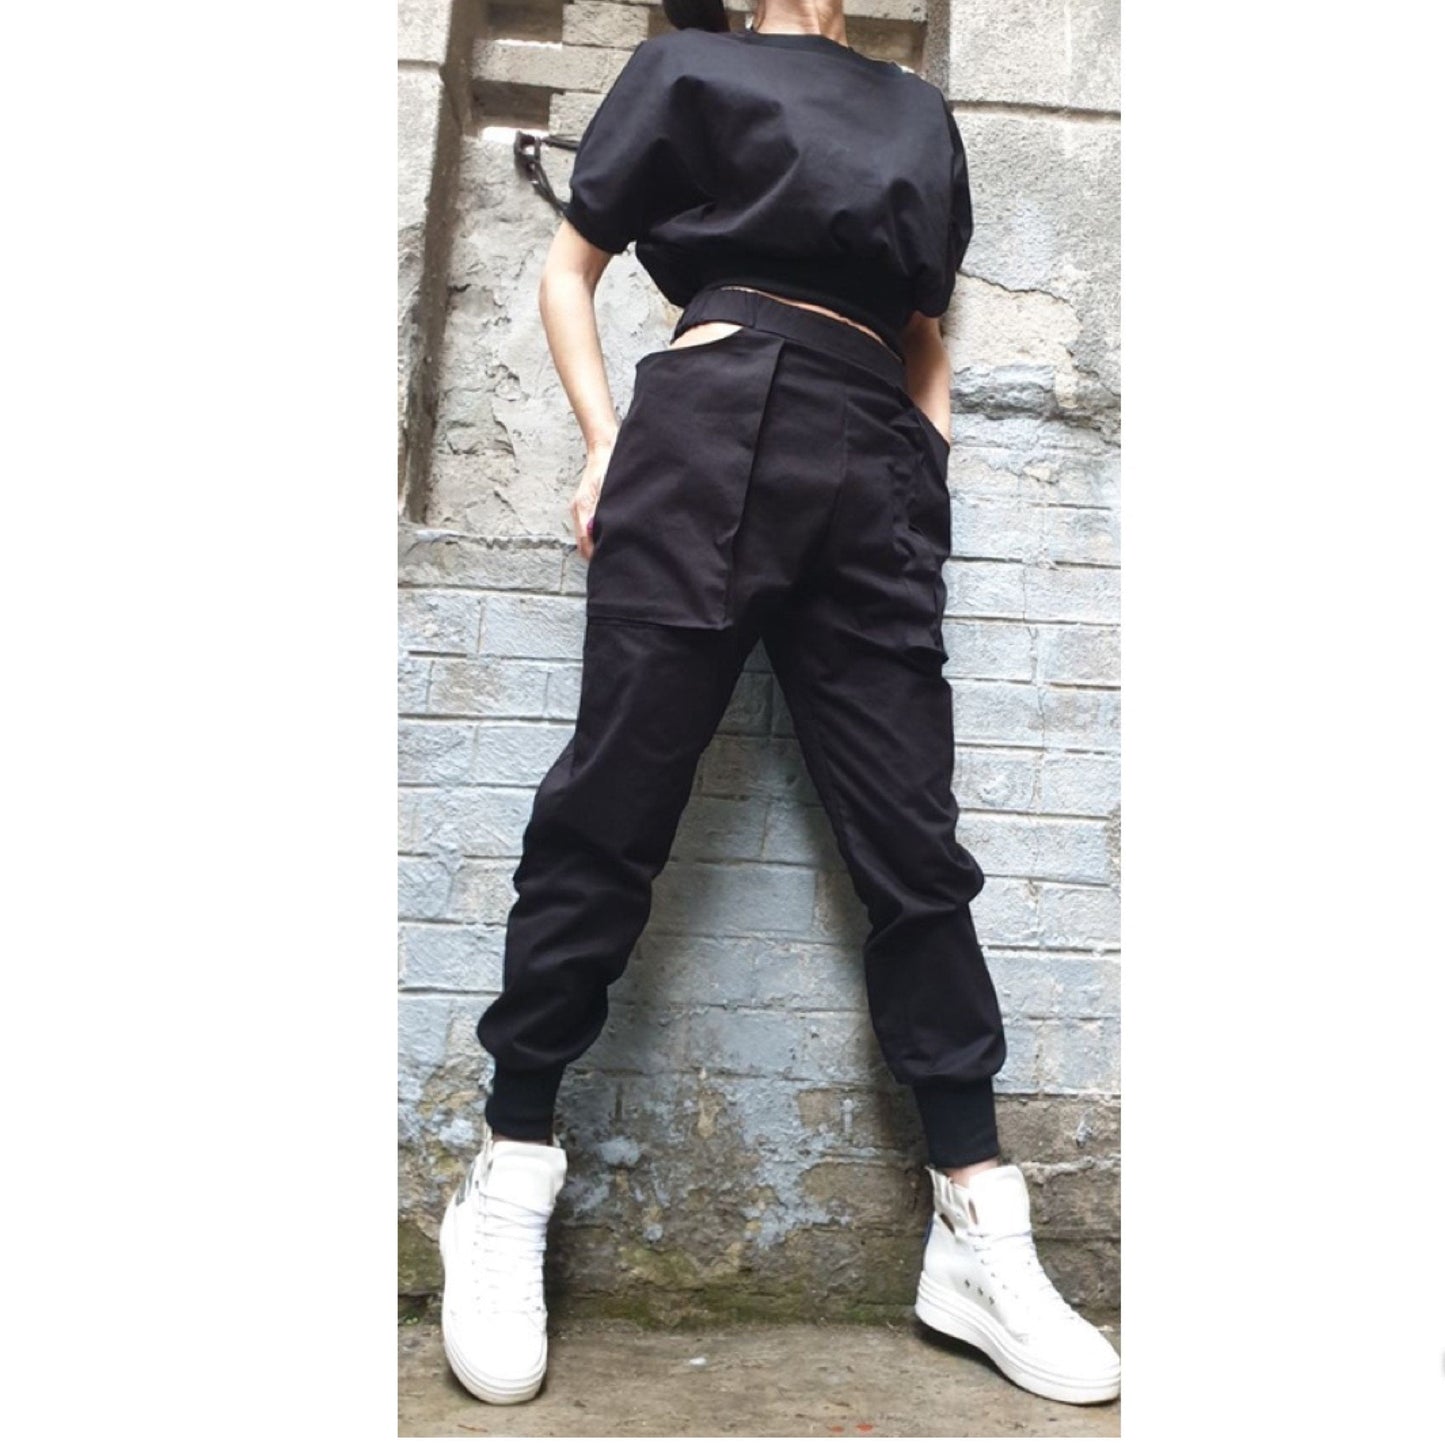 New Collection Avantgarde Trousers - Handmade clothing from AngelBySilvia - Top Designer Brands 